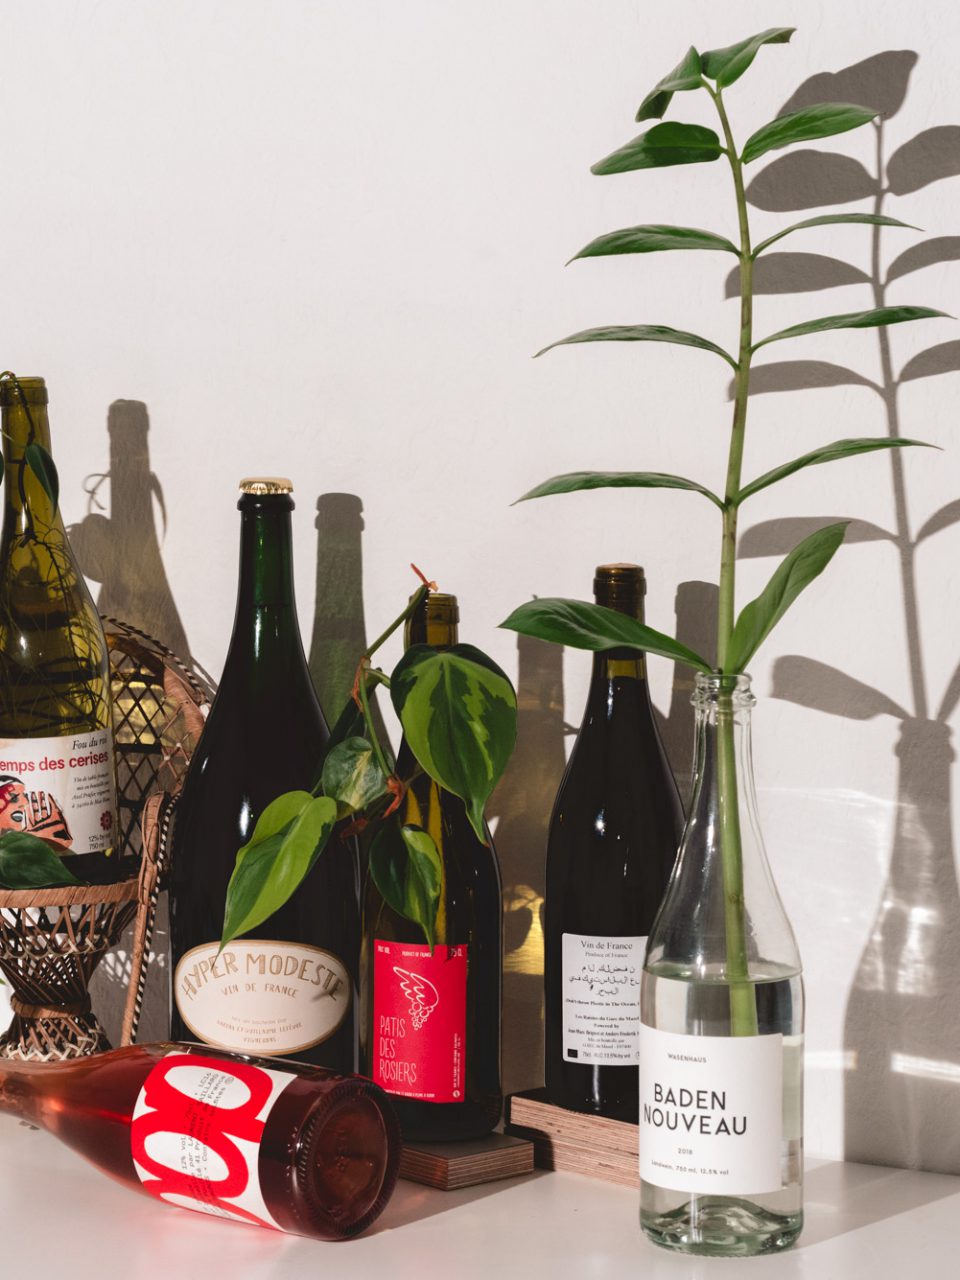 AN EASY INTRODUCTION TO NATURAL WINE